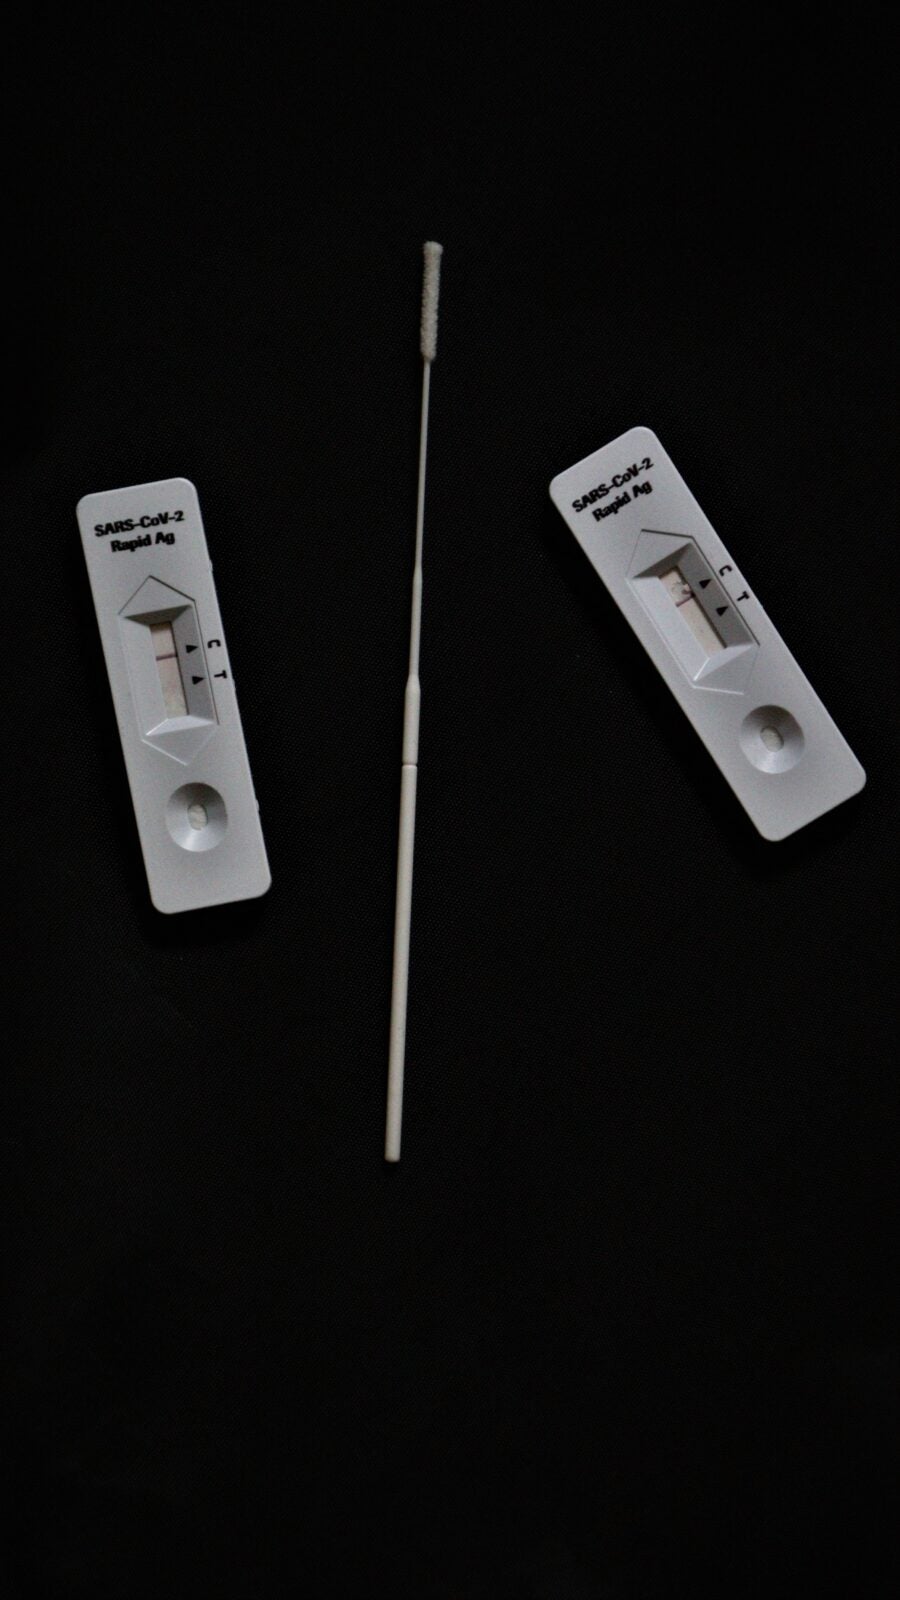 Two covid tests which shows the negative result separated by a nose stick between them.